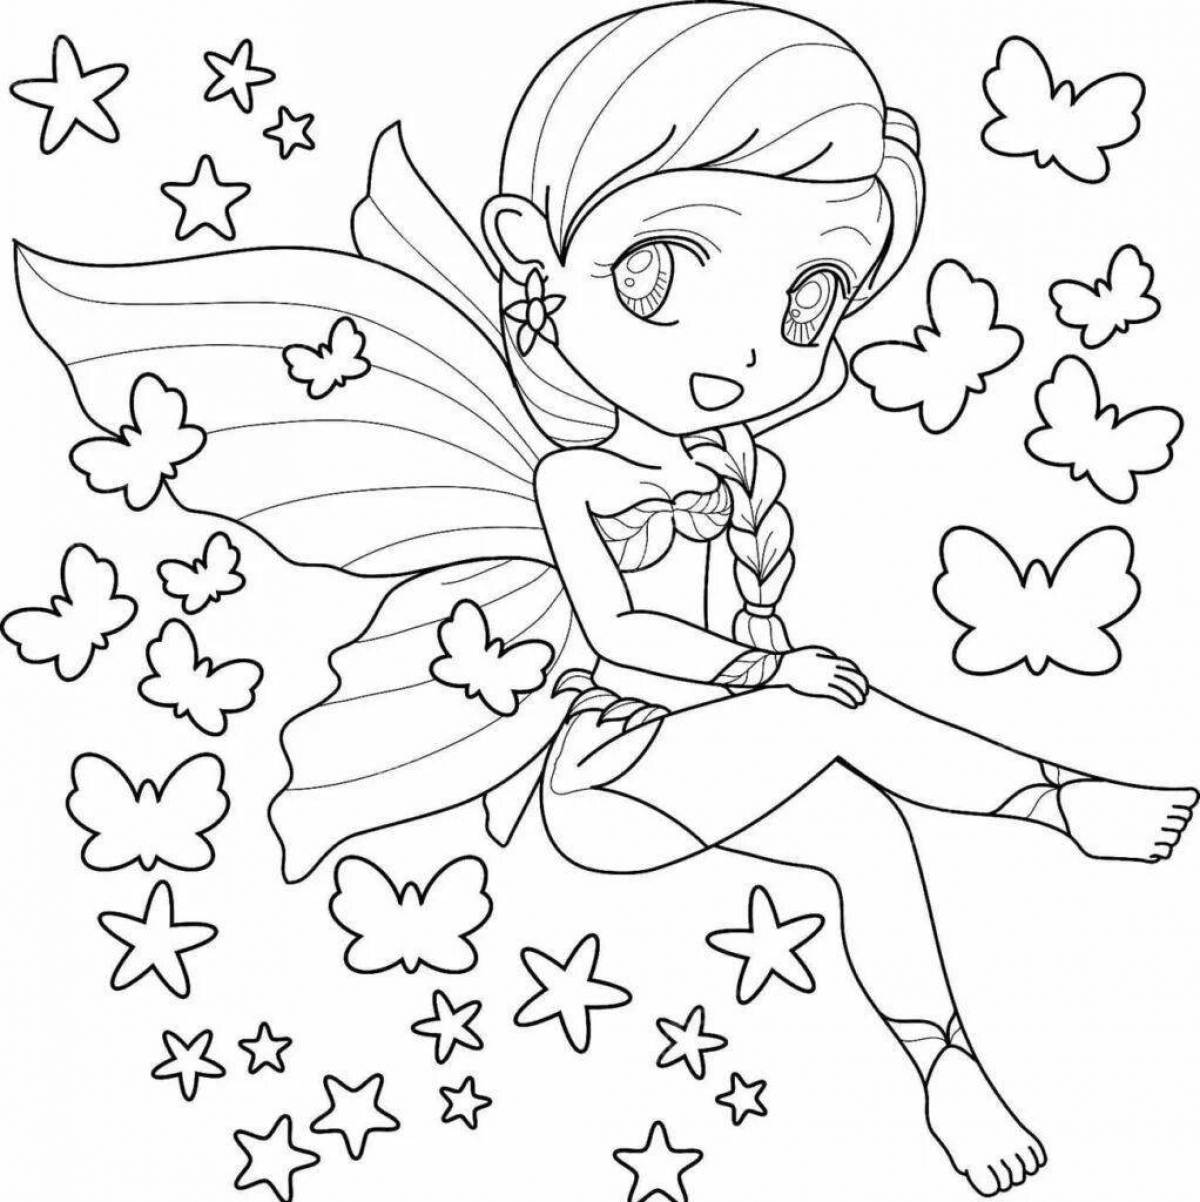 Fairy bright coloring pages for children 5-6 years old